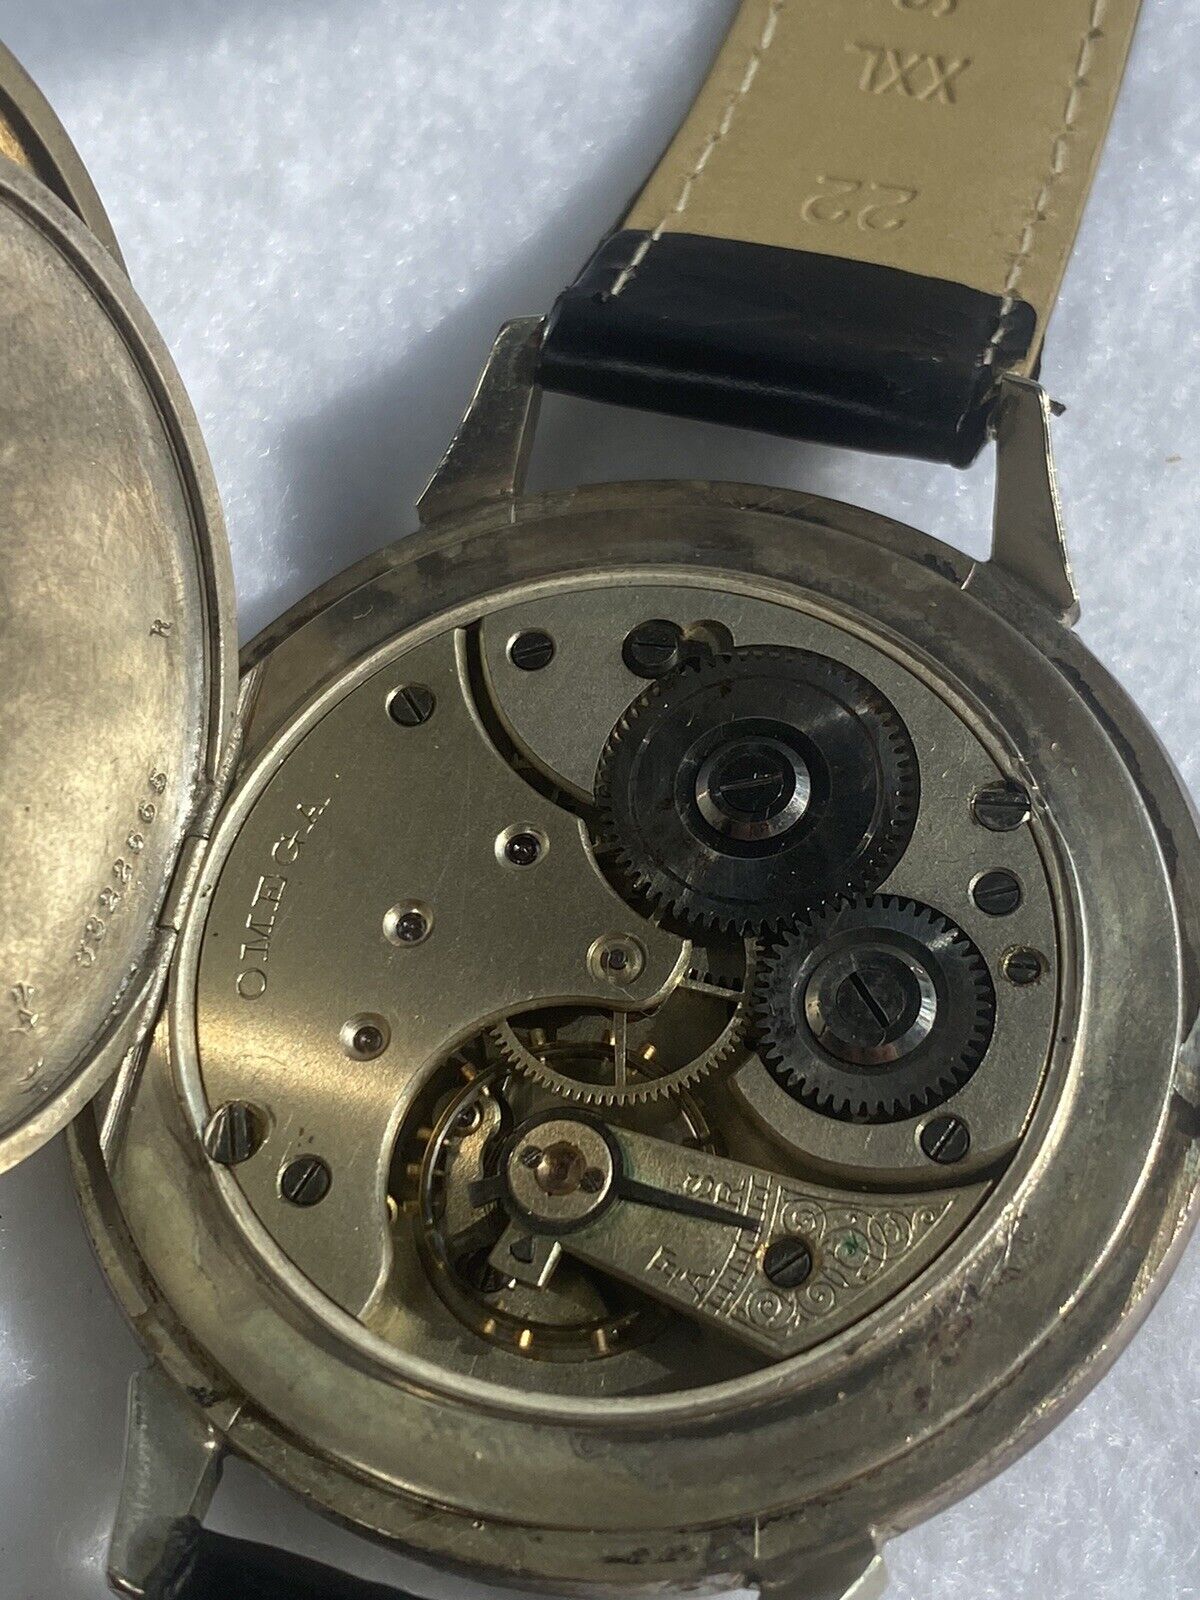 Vintage Swiss OMEGA Military Marriage Watch